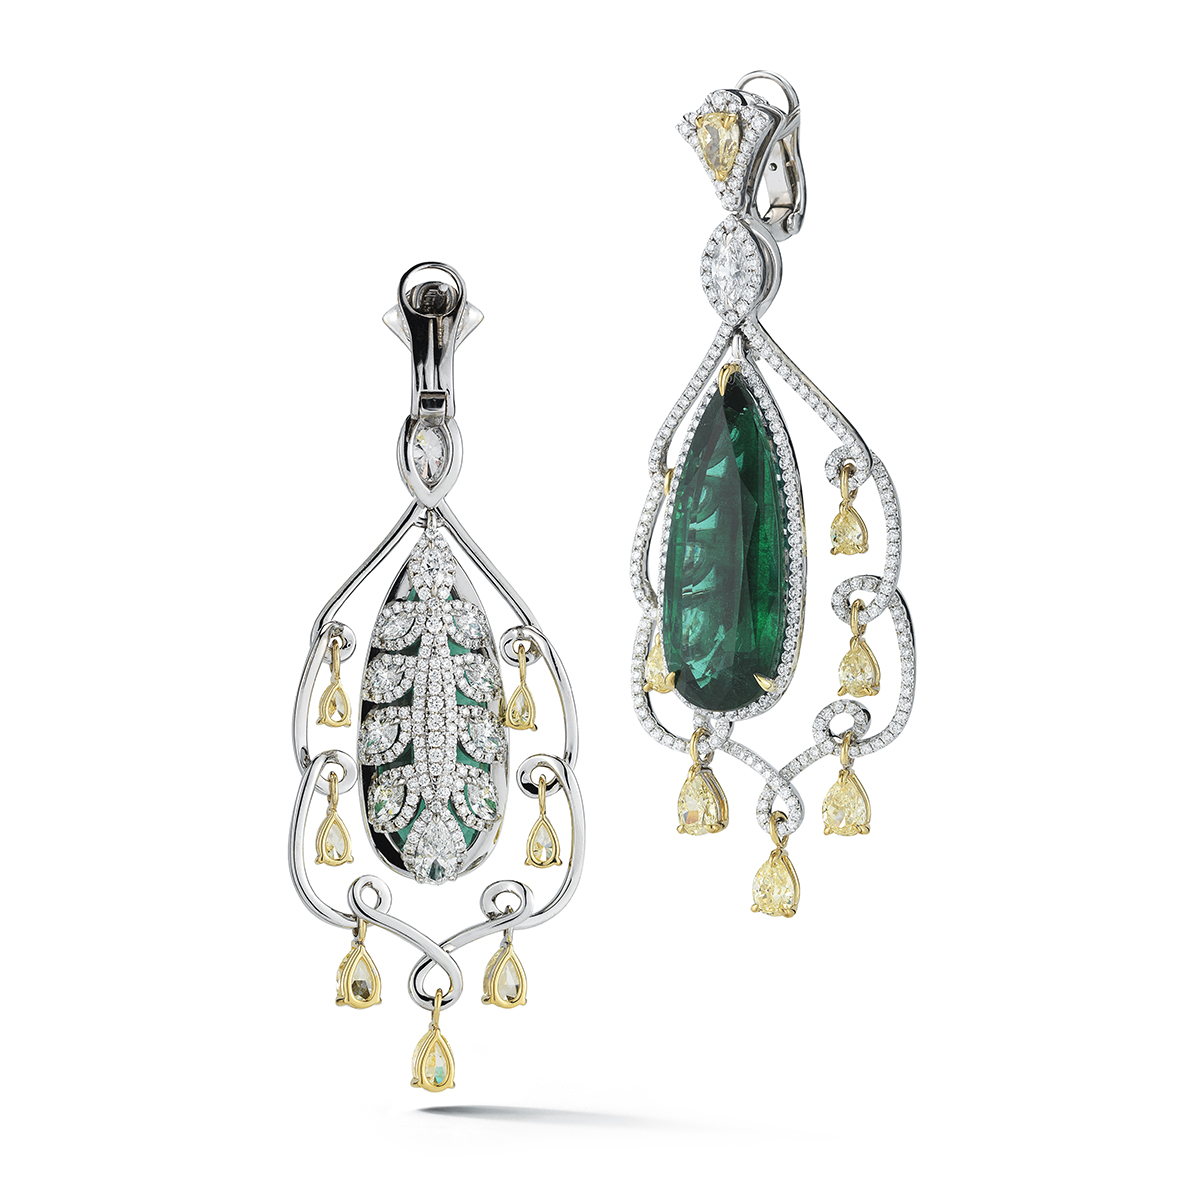 COLOMBIAN EMERALD AND DIAMOND EARRING